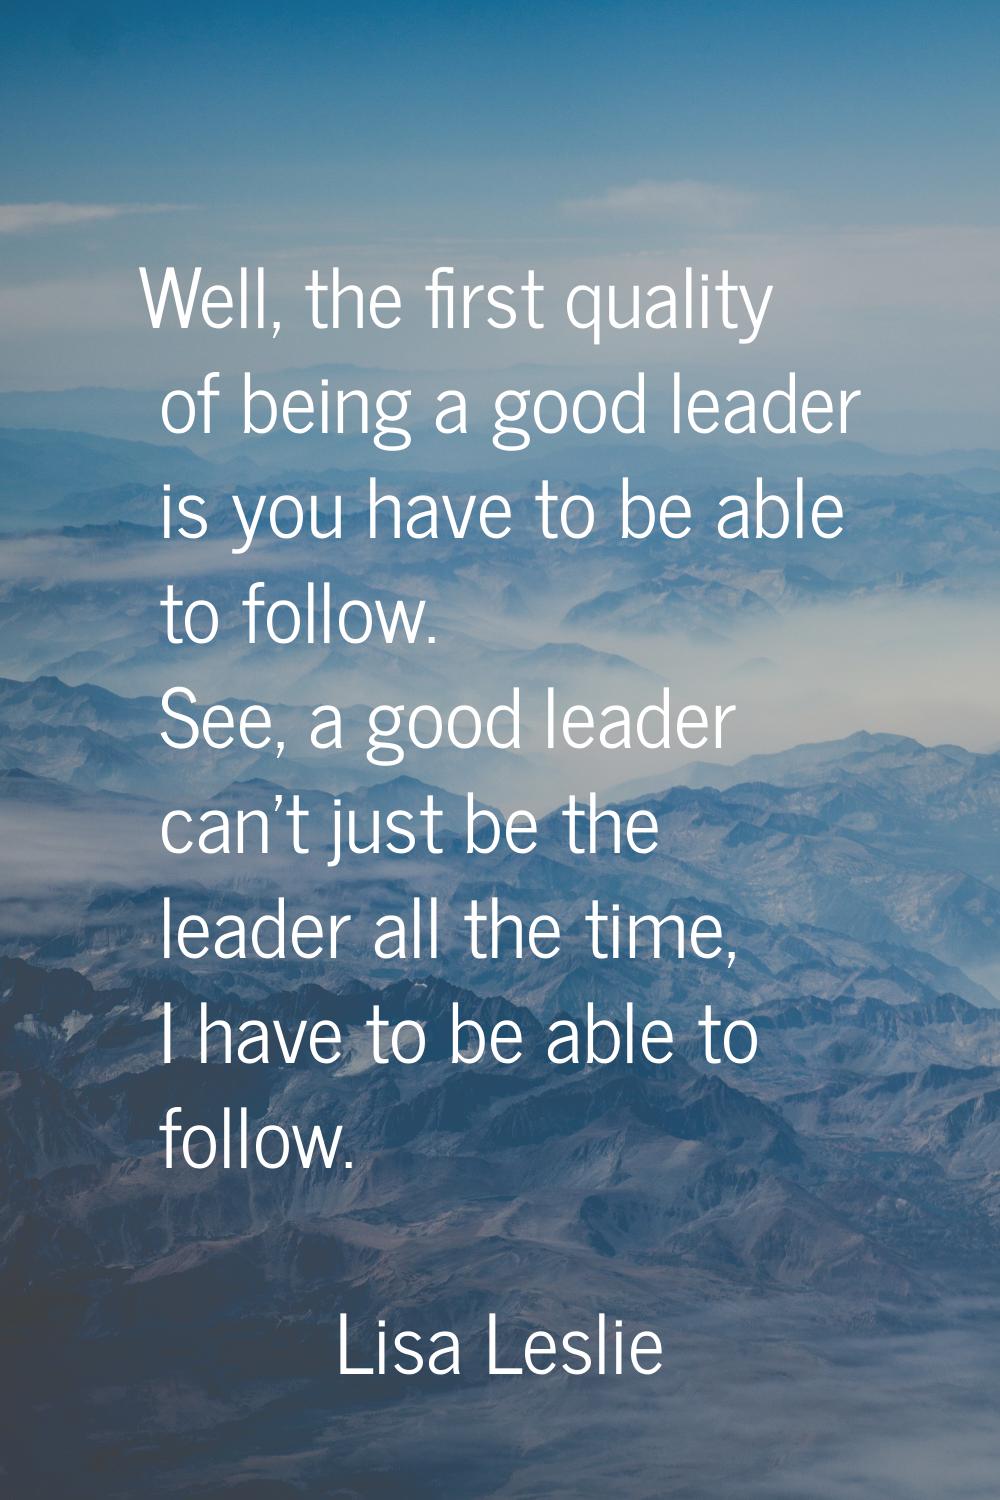 Well, the first quality of being a good leader is you have to be able to follow. See, a good leader